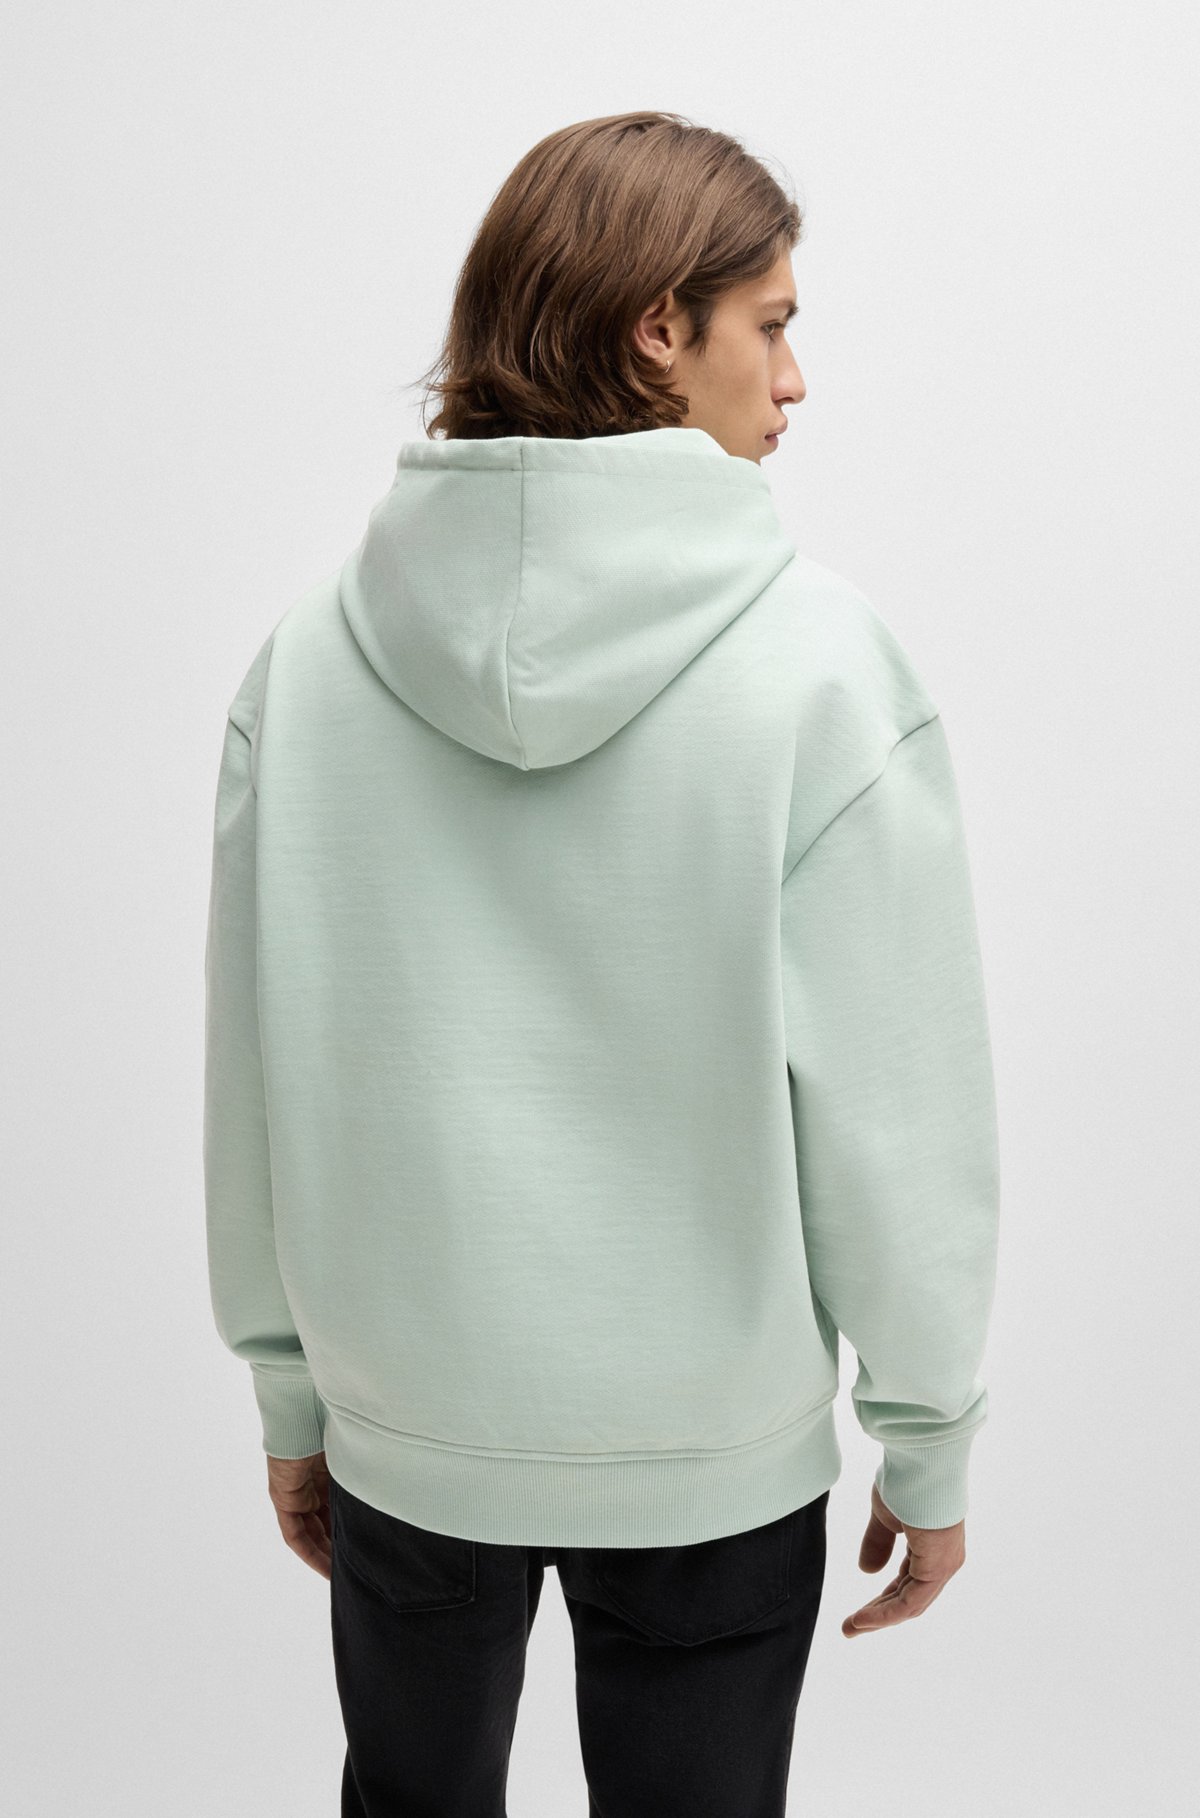 HUGO - Cotton-terry all-gender hoodie in a relaxed fit